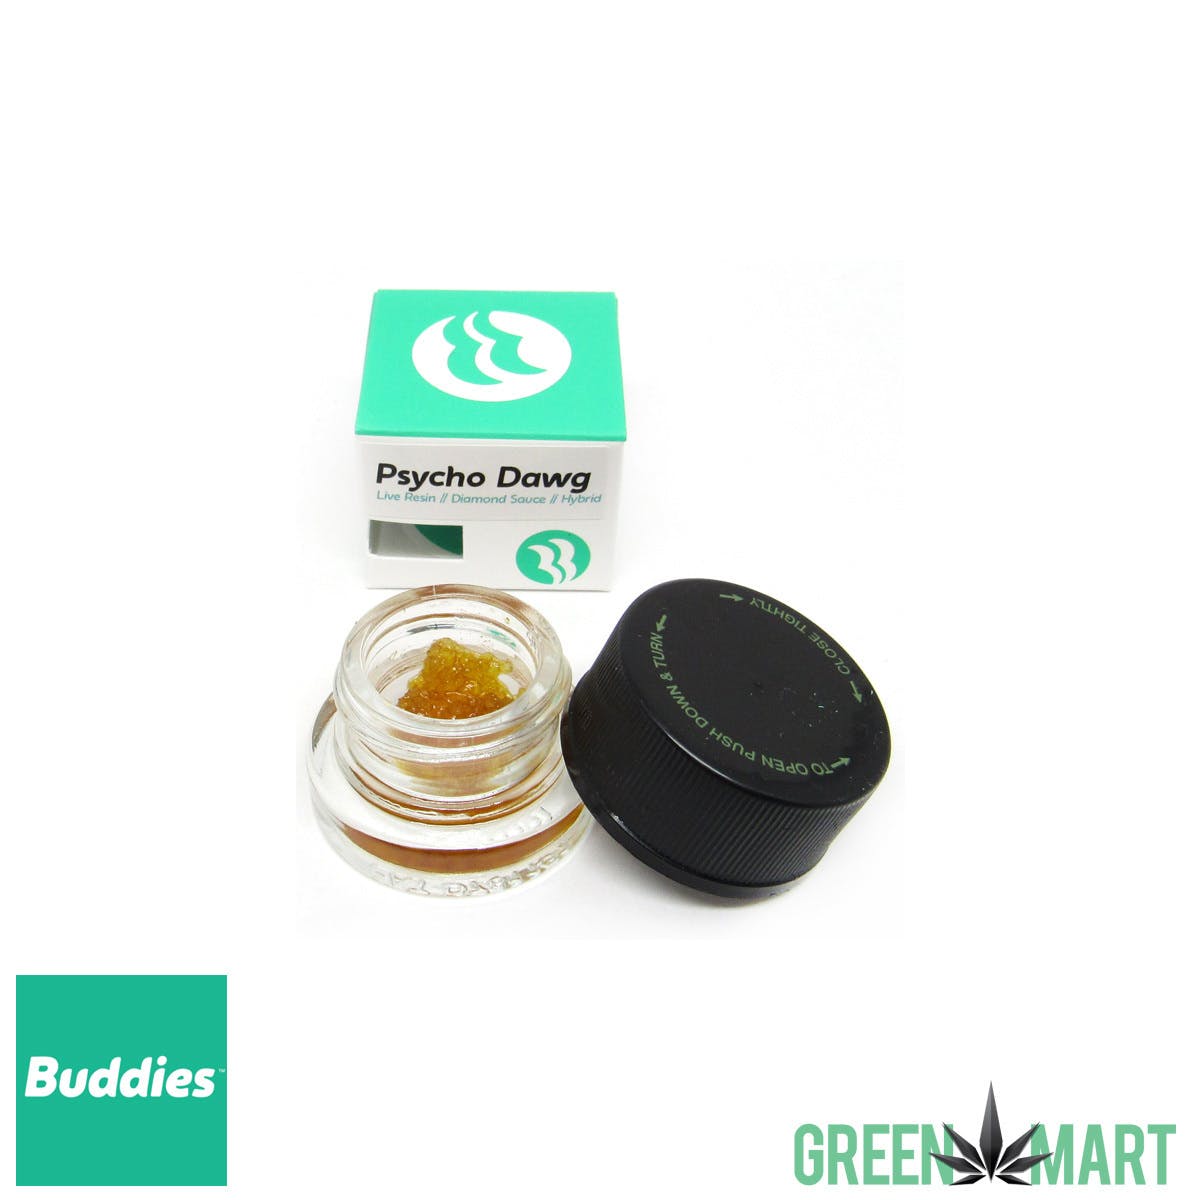 concentrate-buddies-1g-live-resin-psycho-dawg